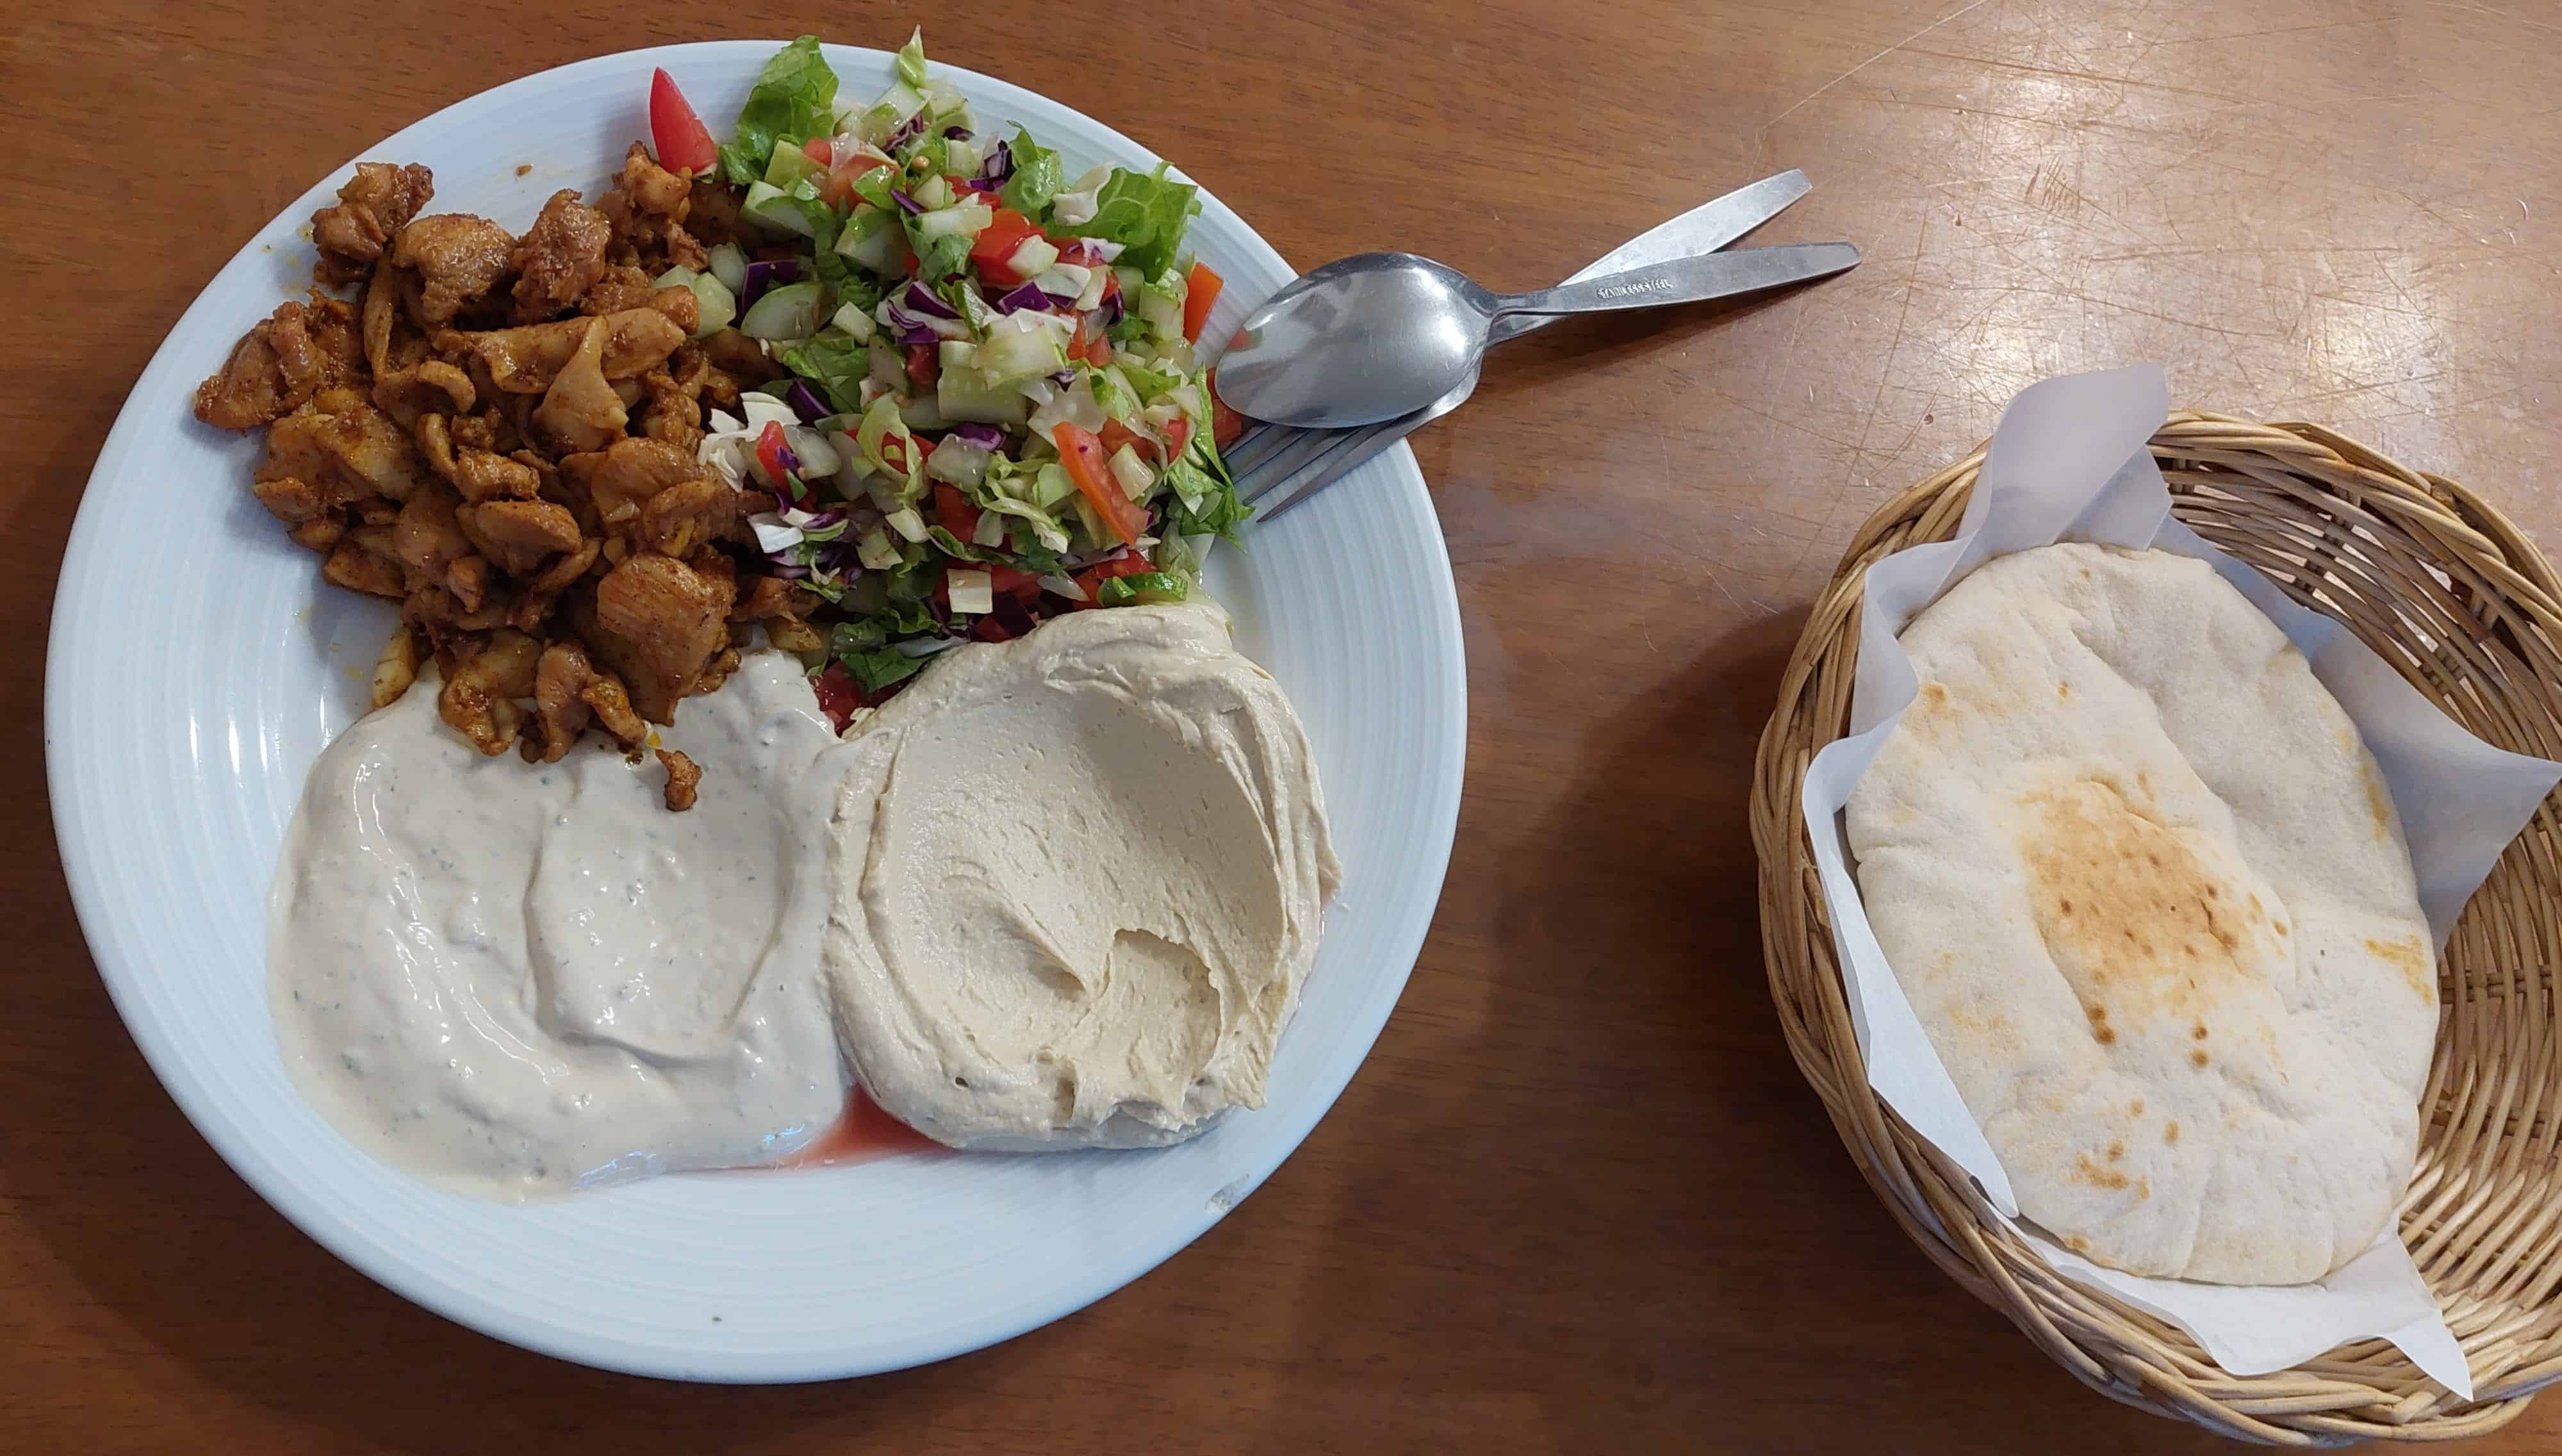 Chicken shawarma plate with tahini, hummus and side-salad. Replace chicken with falafel if you're vegan.